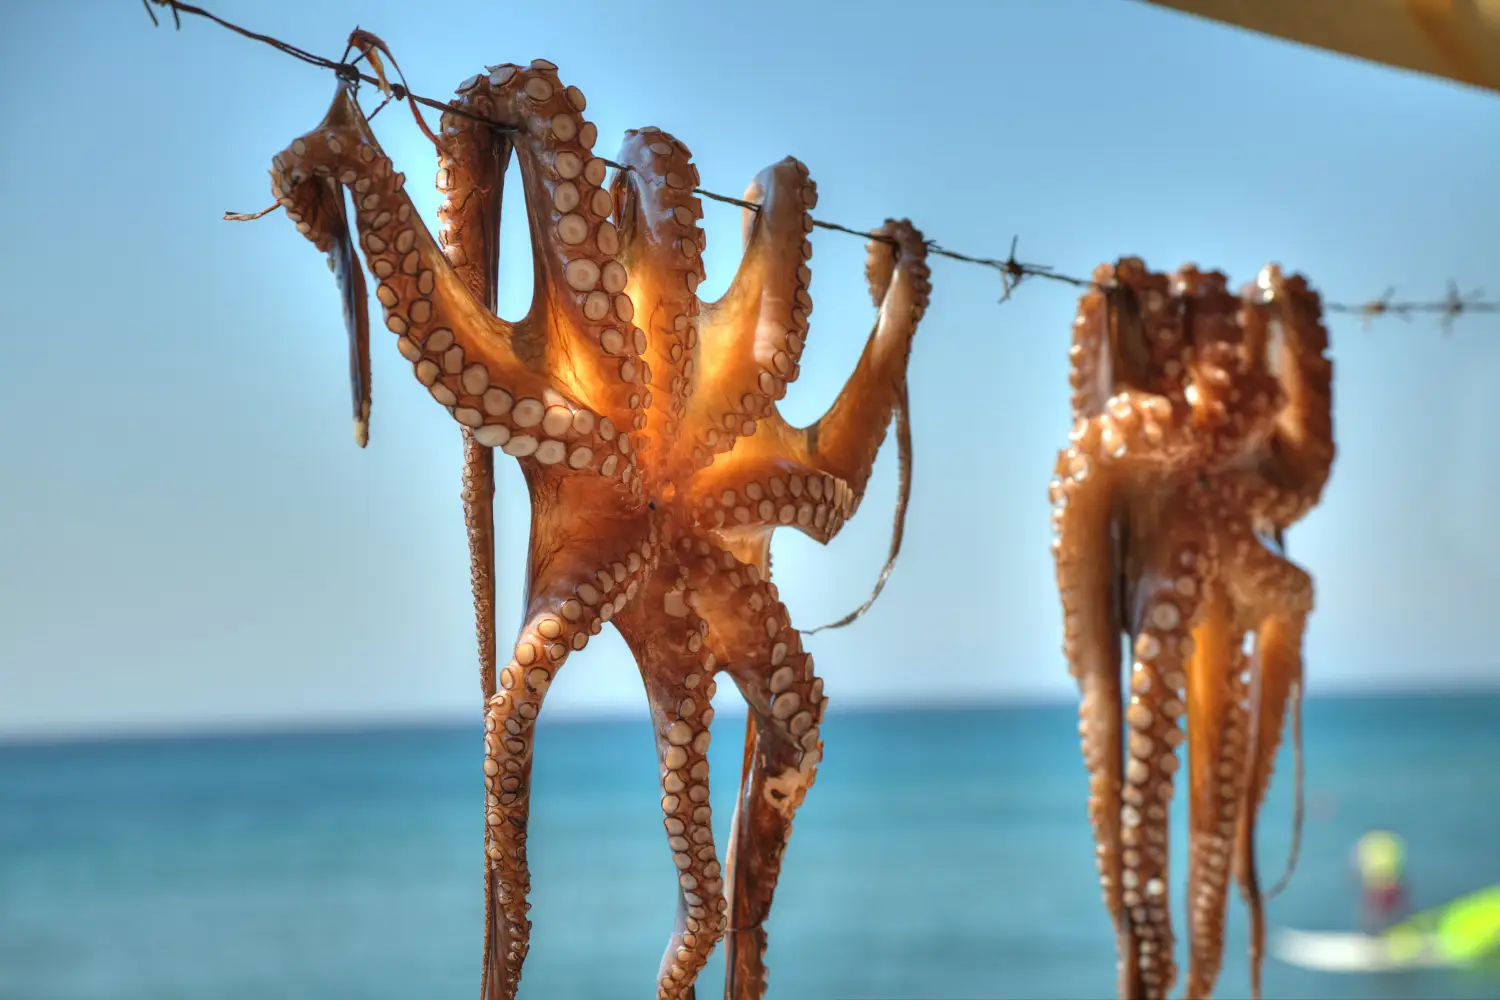 Ferry to Mytiline - Octopus hanging up to dry in the sunshine in the Greek islands, Mytiline, Lesvos.